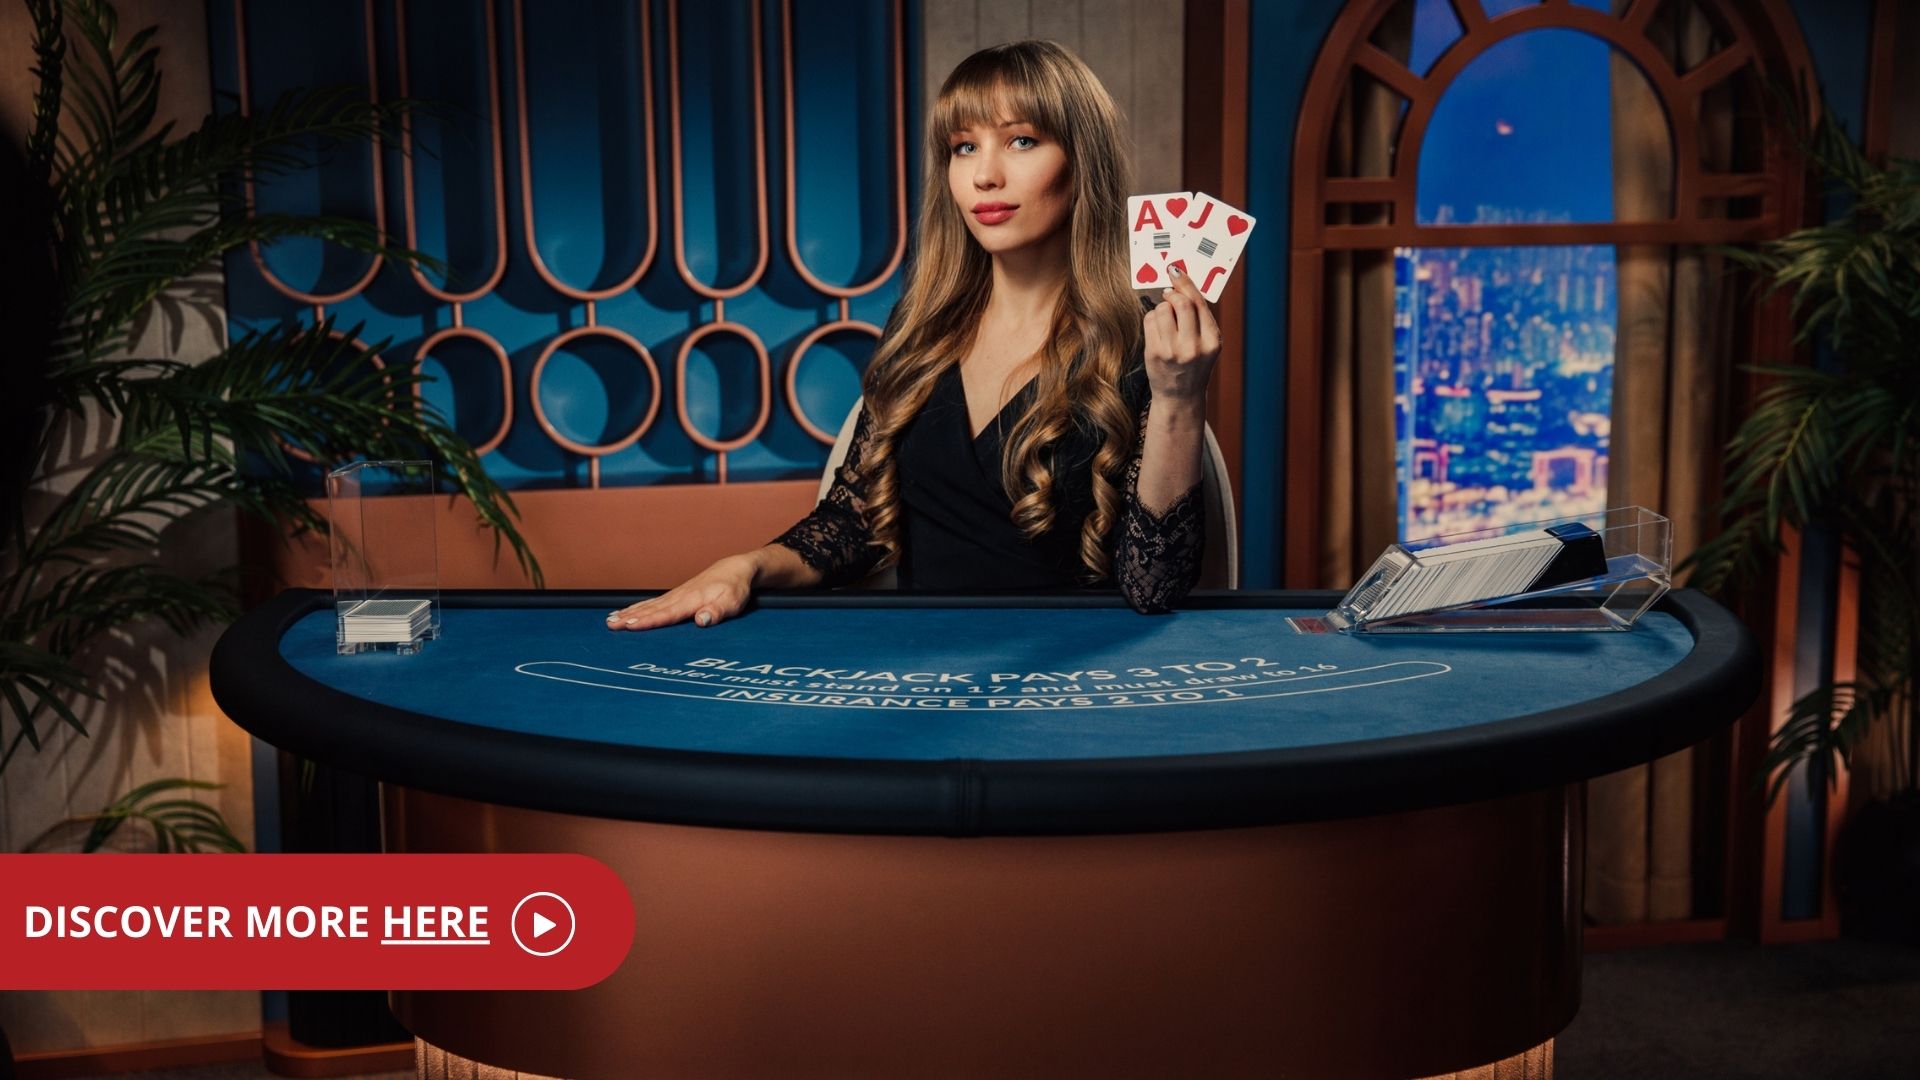 Female game presenter behind a table in Standard Blackjack reading 'discover more here'.